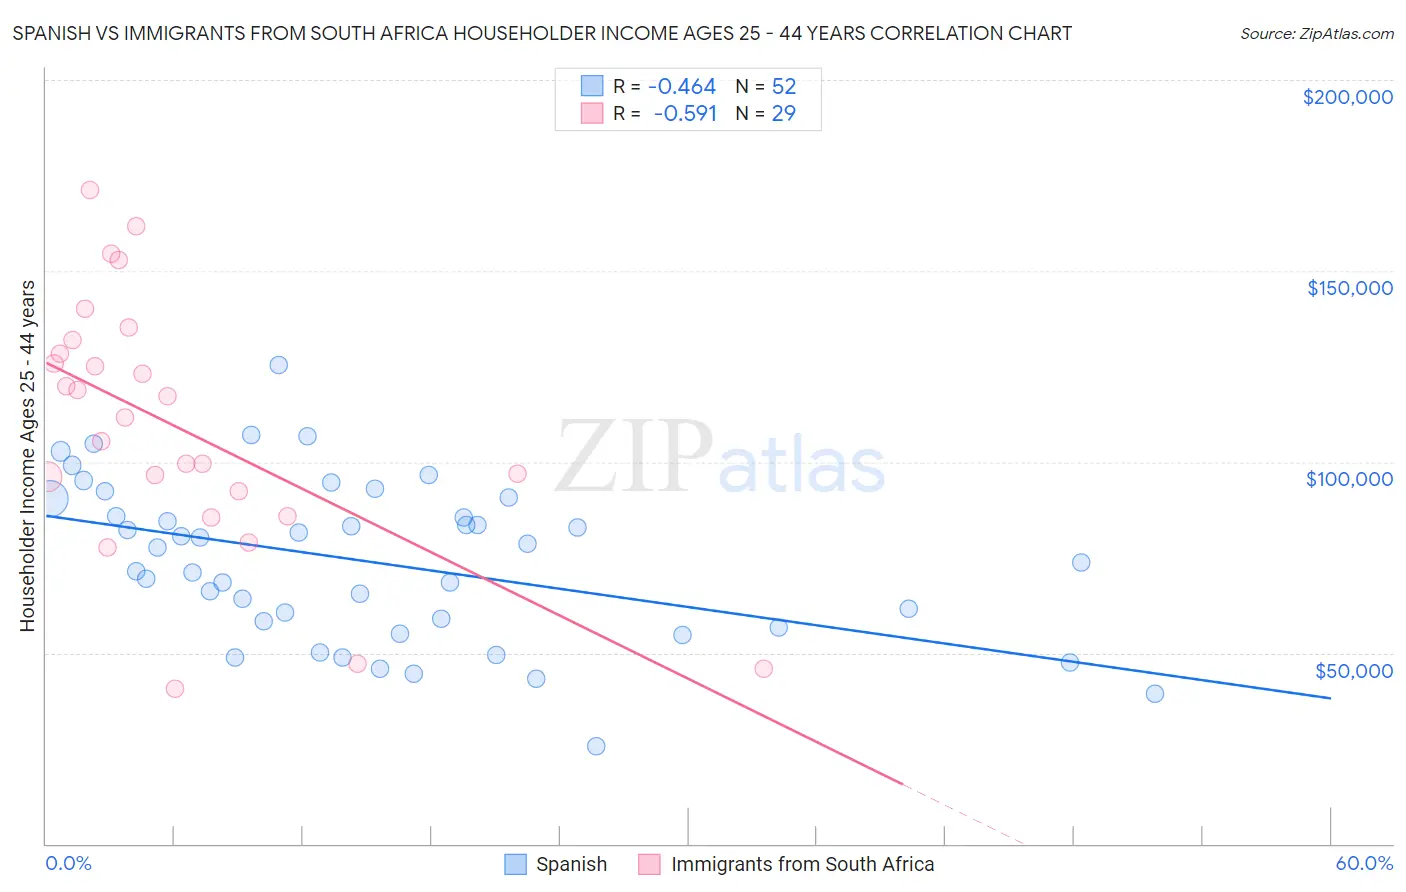 Spanish vs Immigrants from South Africa Householder Income Ages 25 - 44 years